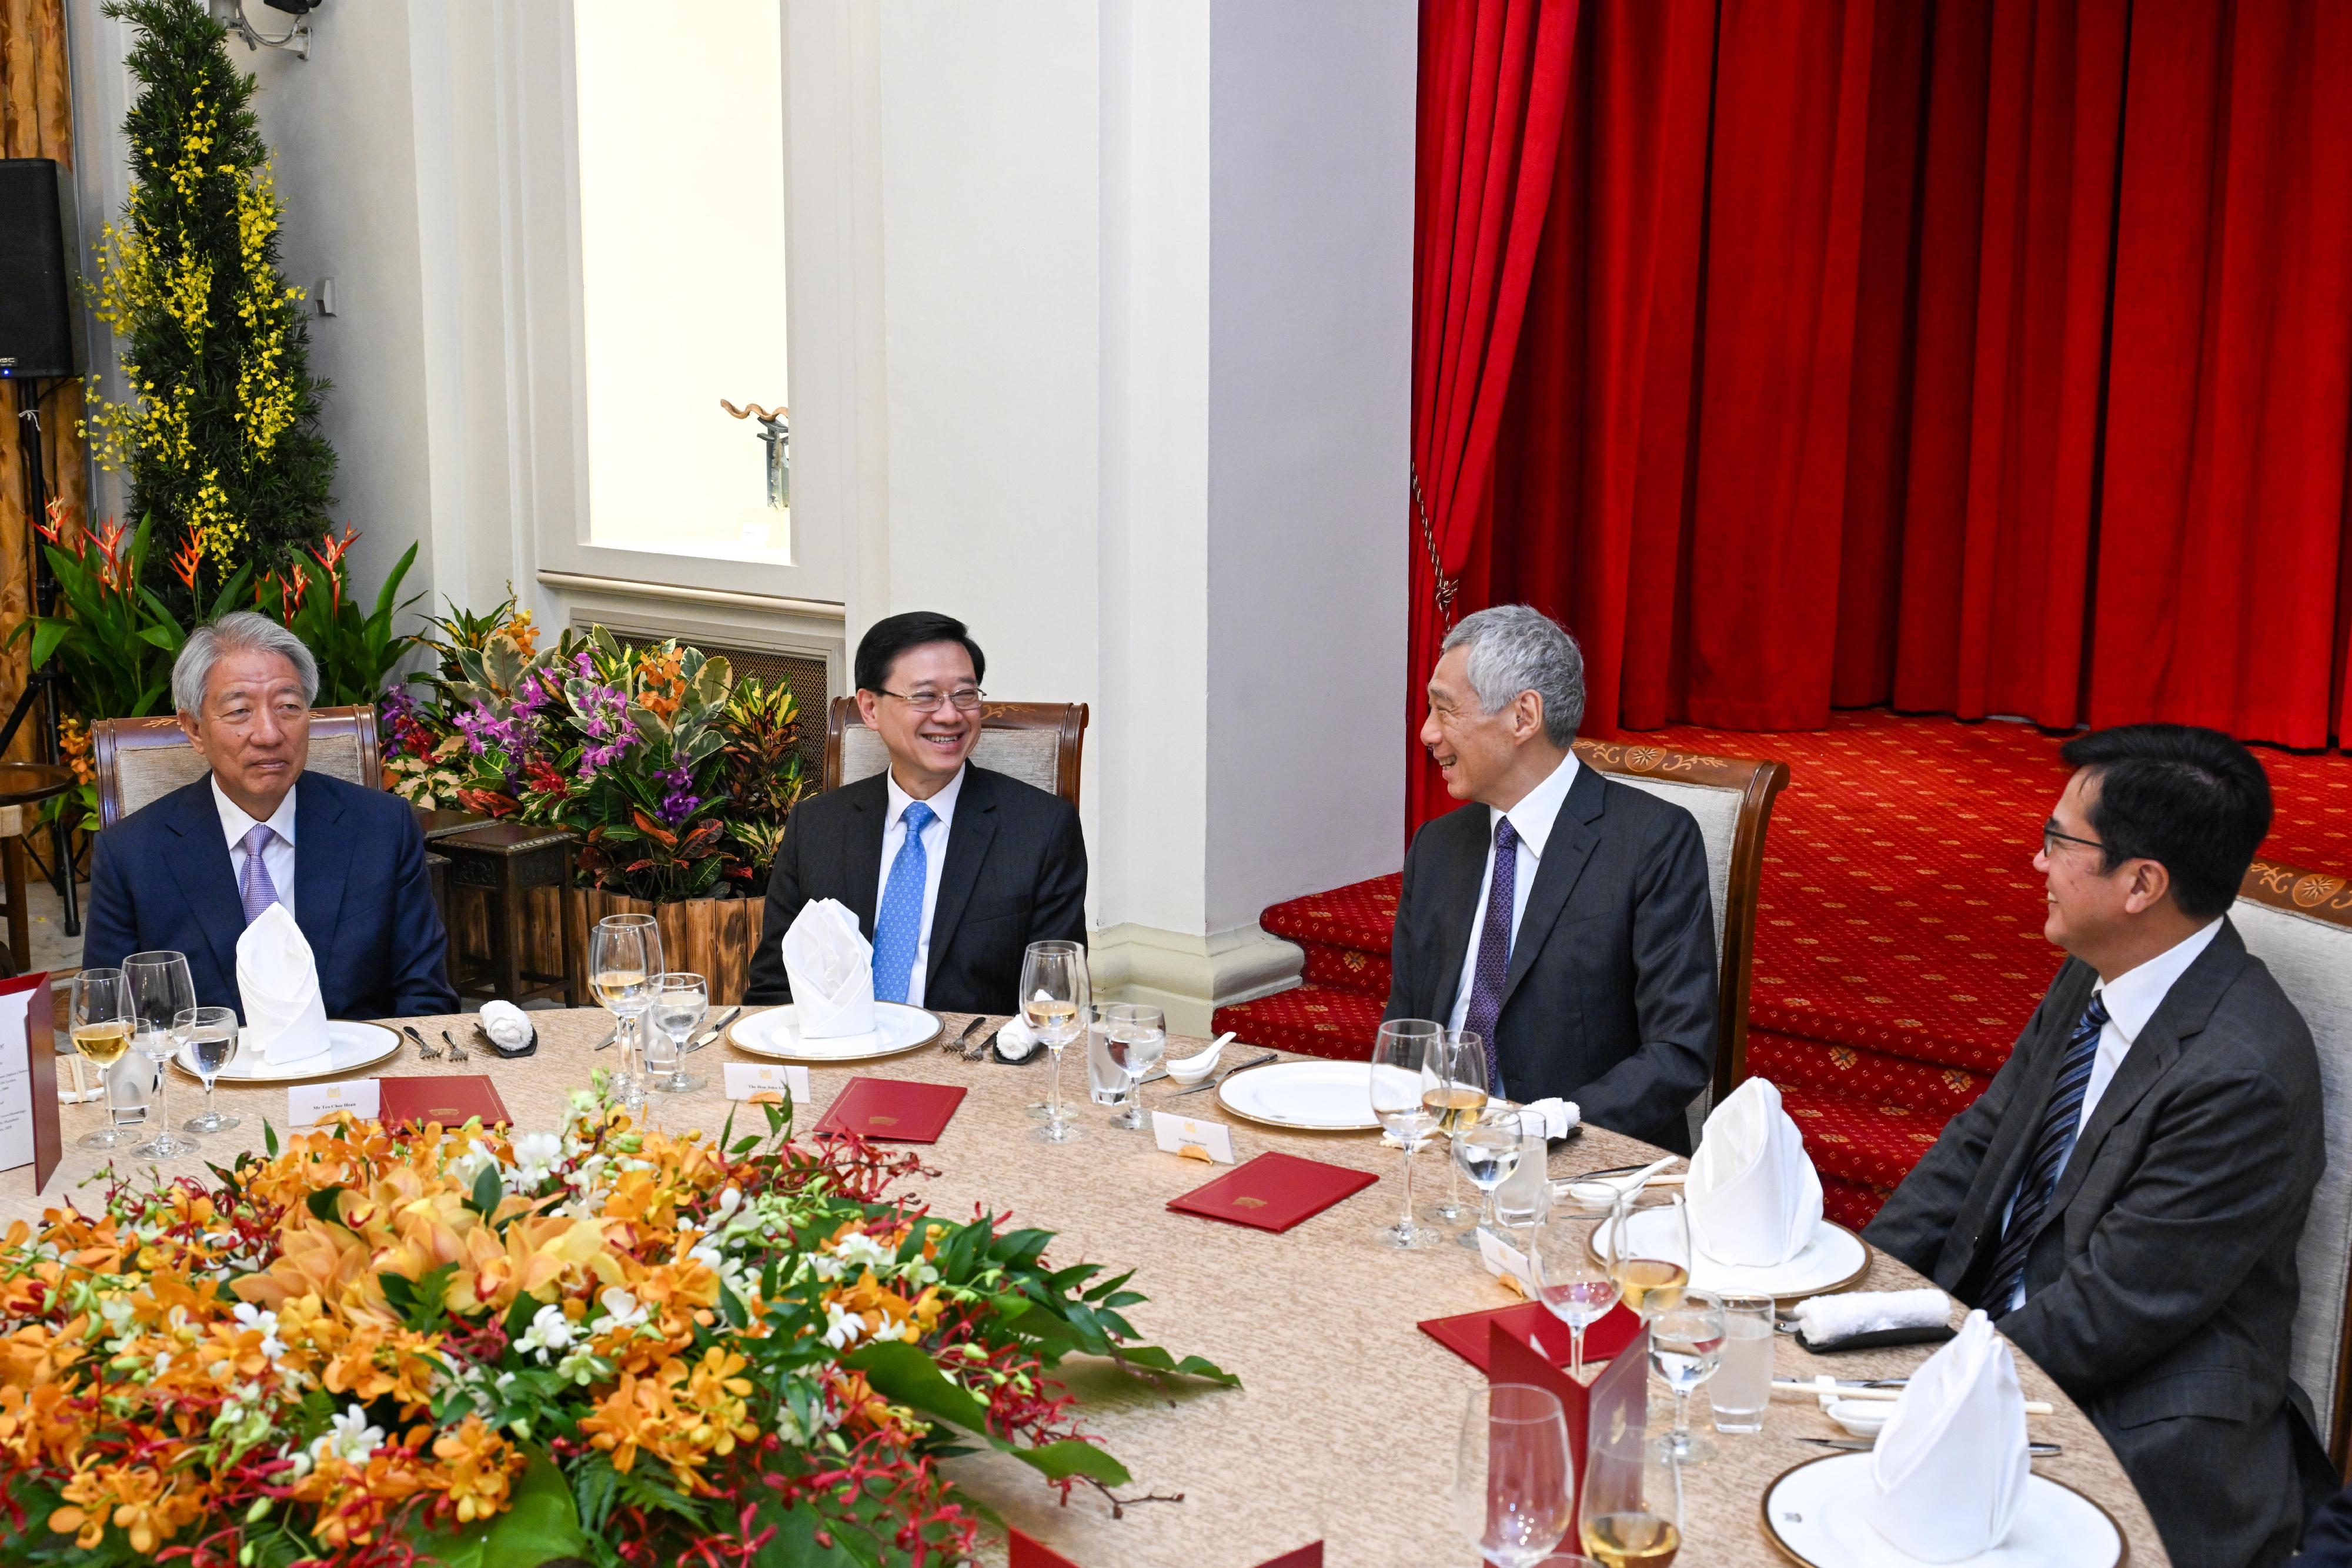 The Chief Executive, Mr John Lee (second left), attended in Singapore today (July 24) a lunch hosted by the Prime Minister of Singapore, Mr Lee Hsien Loong (second right). Looking on are the Deputy Financial Secretary, Mr Michael Wong (first right), and the Senior Minister and Coordinating Minister for National Security of Singapore, Mr Teo Chee Hean (first left).